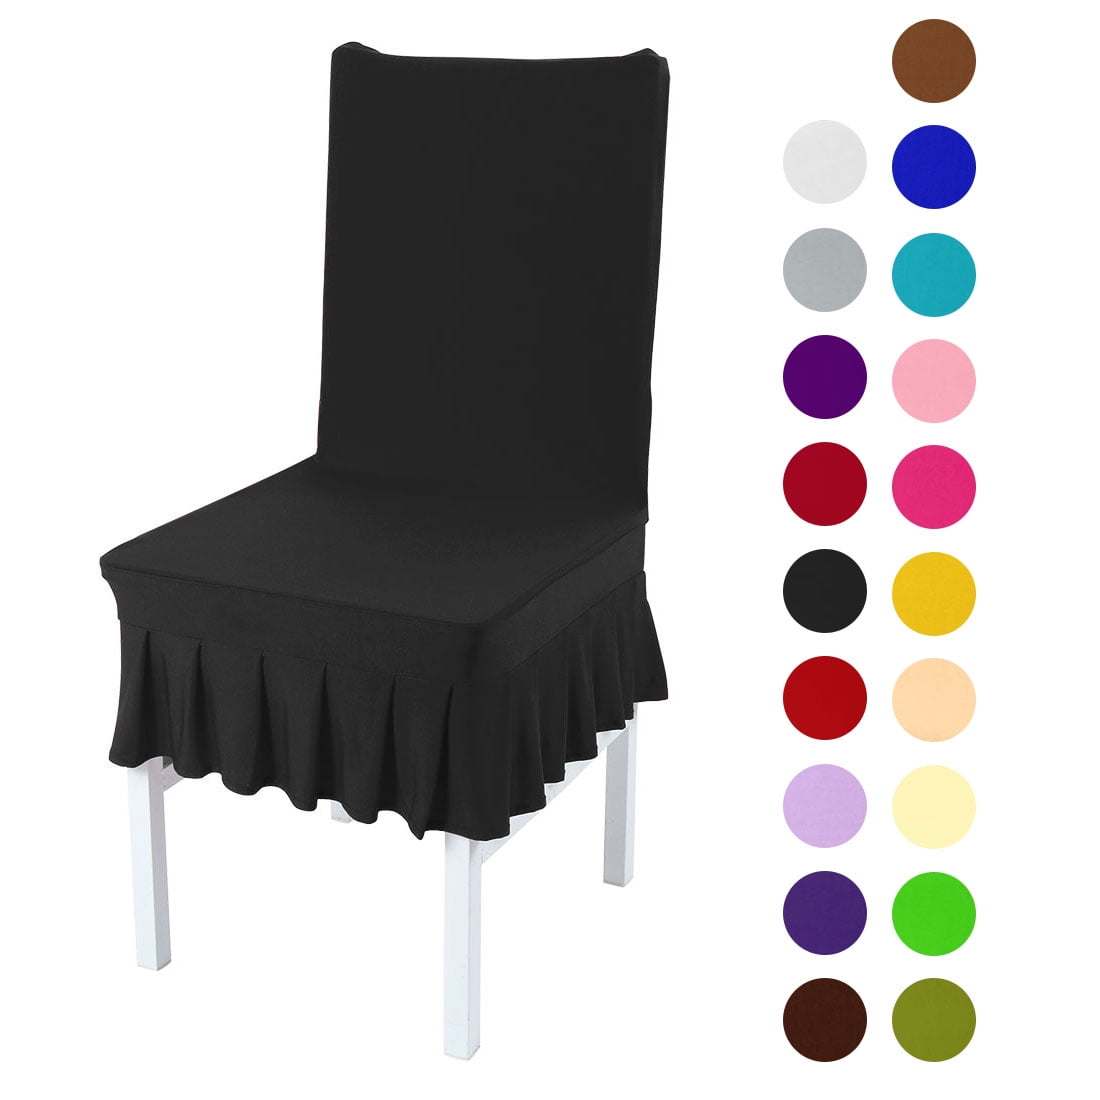 Washable Chair Cover Seat Removable Protective Slipcover Polyester spandex 